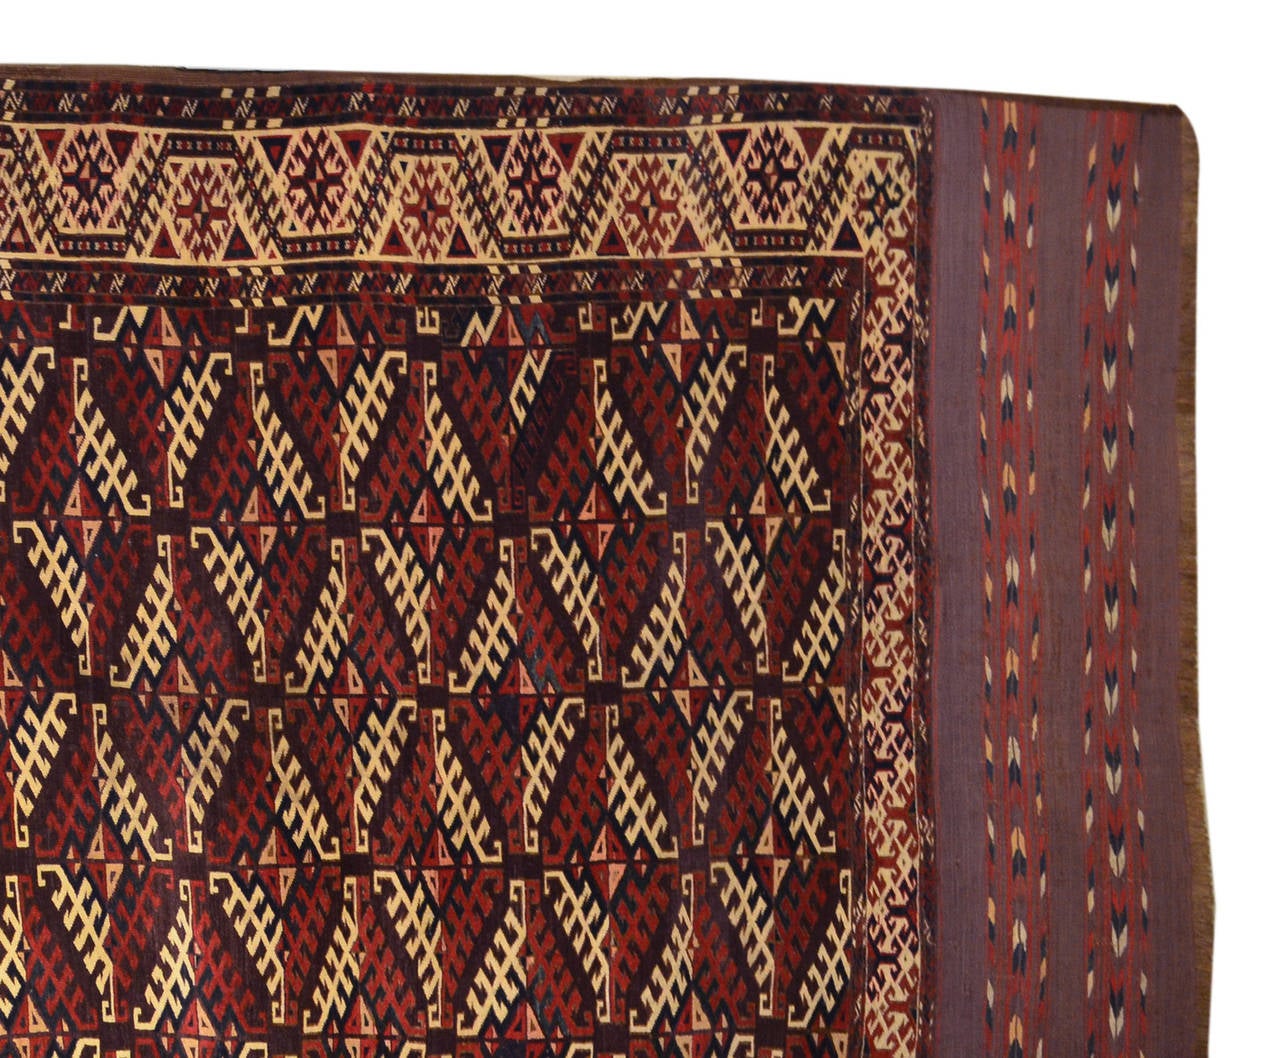 This carpet has been knotted by the Yomut tribe of Turkmenstan in the 19th century. Reddish-brown and shades of yellow are often used by this tribe who lived in the desert. It offers a strong pattern formed by lozenges with white and red hatched